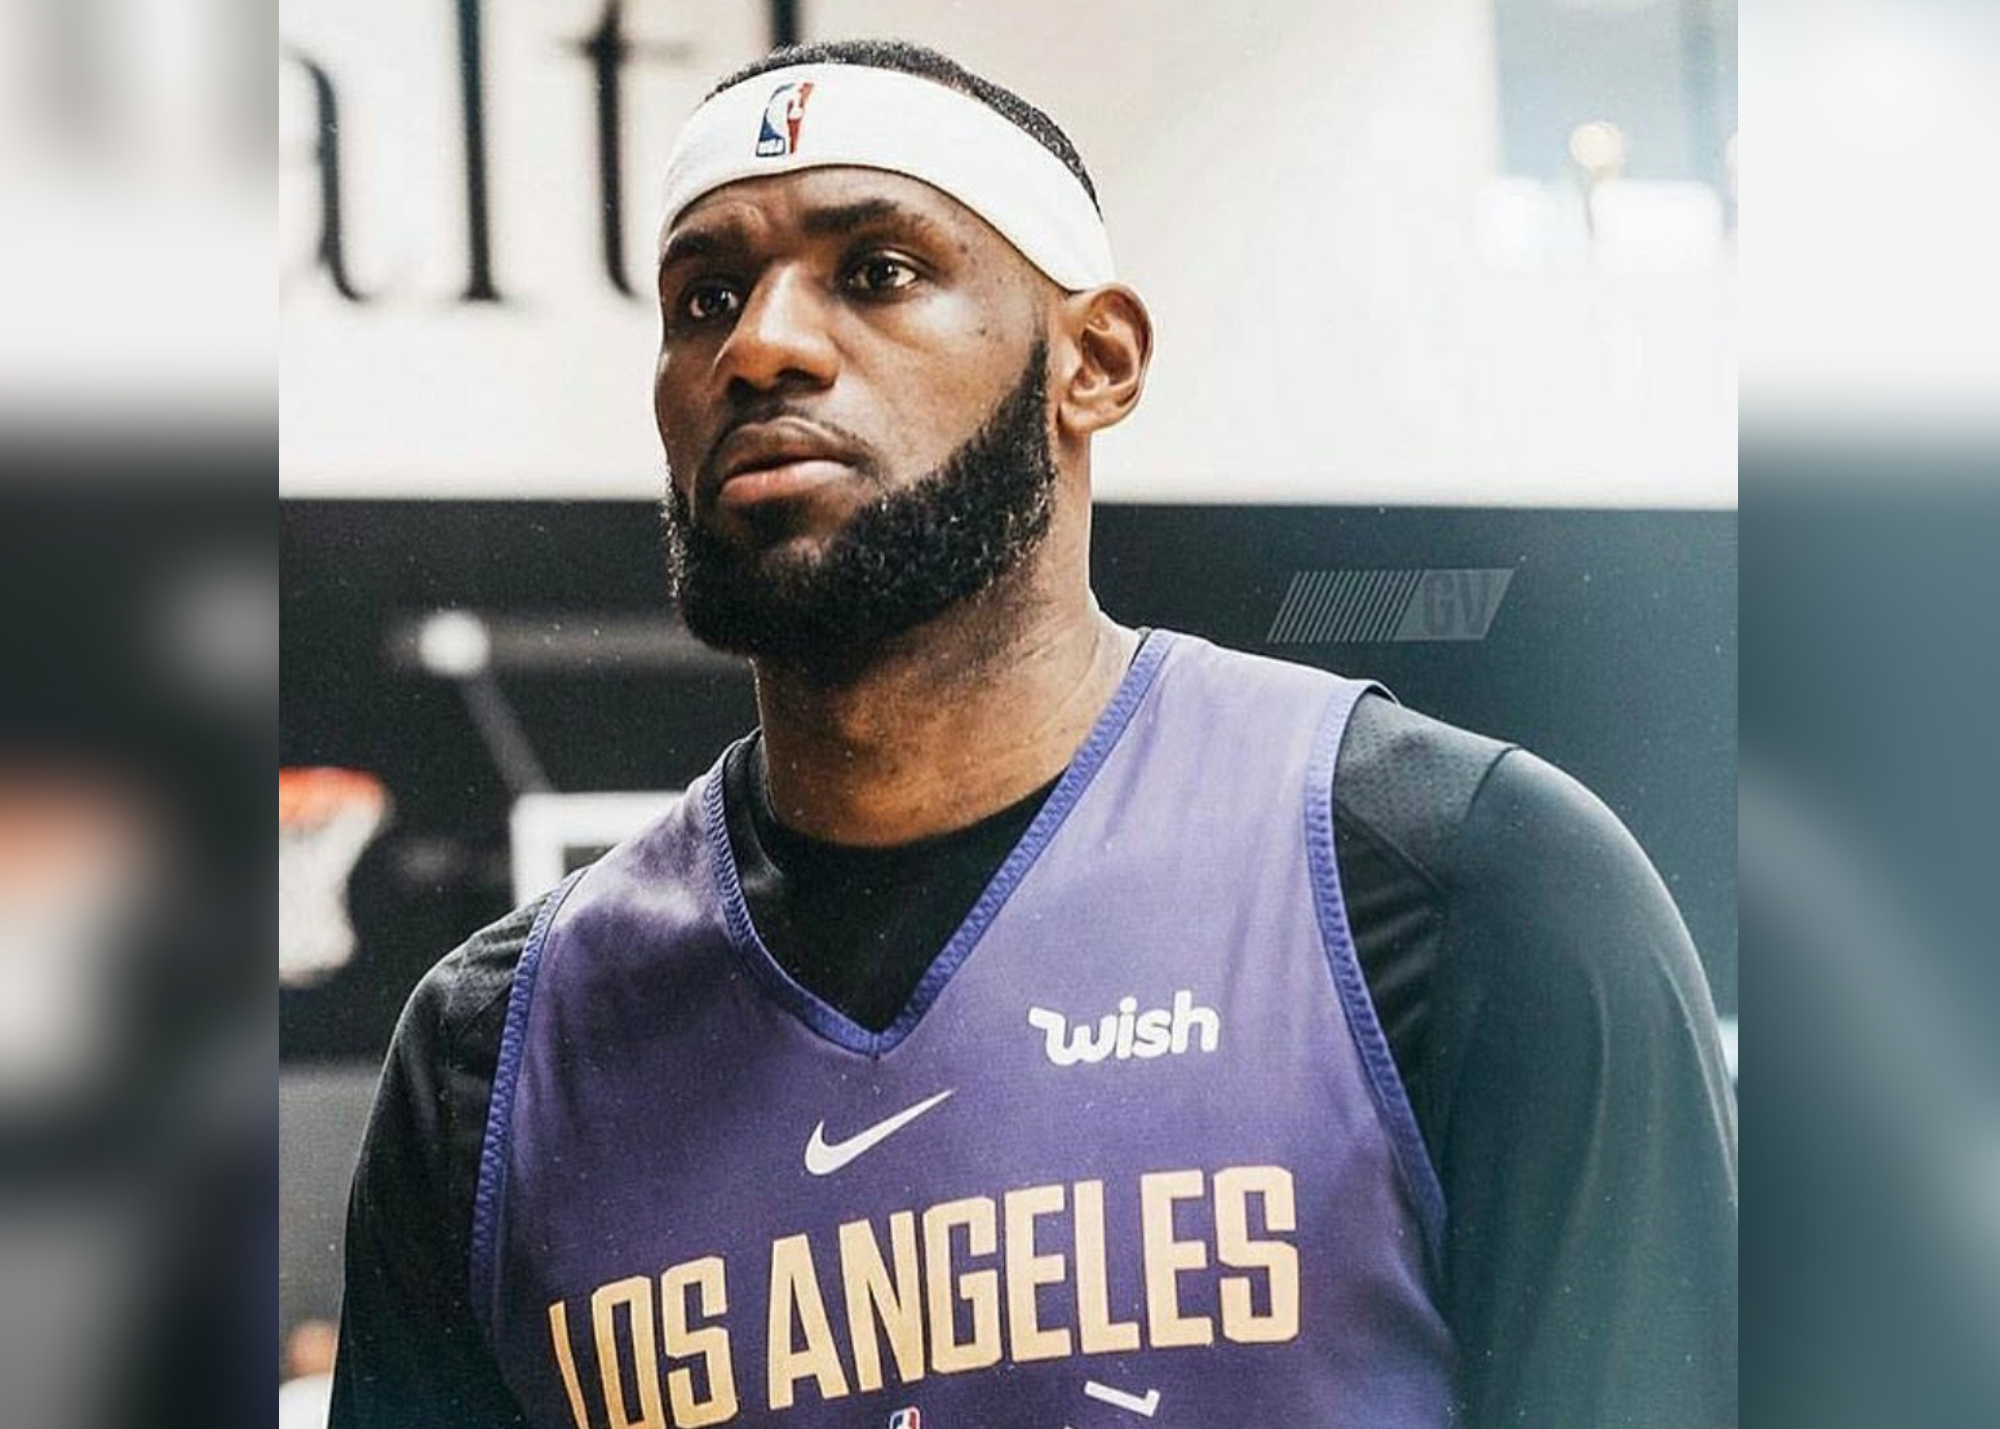 LeBron James Calls For Justice After His Friend’s Sister Is Found Dead